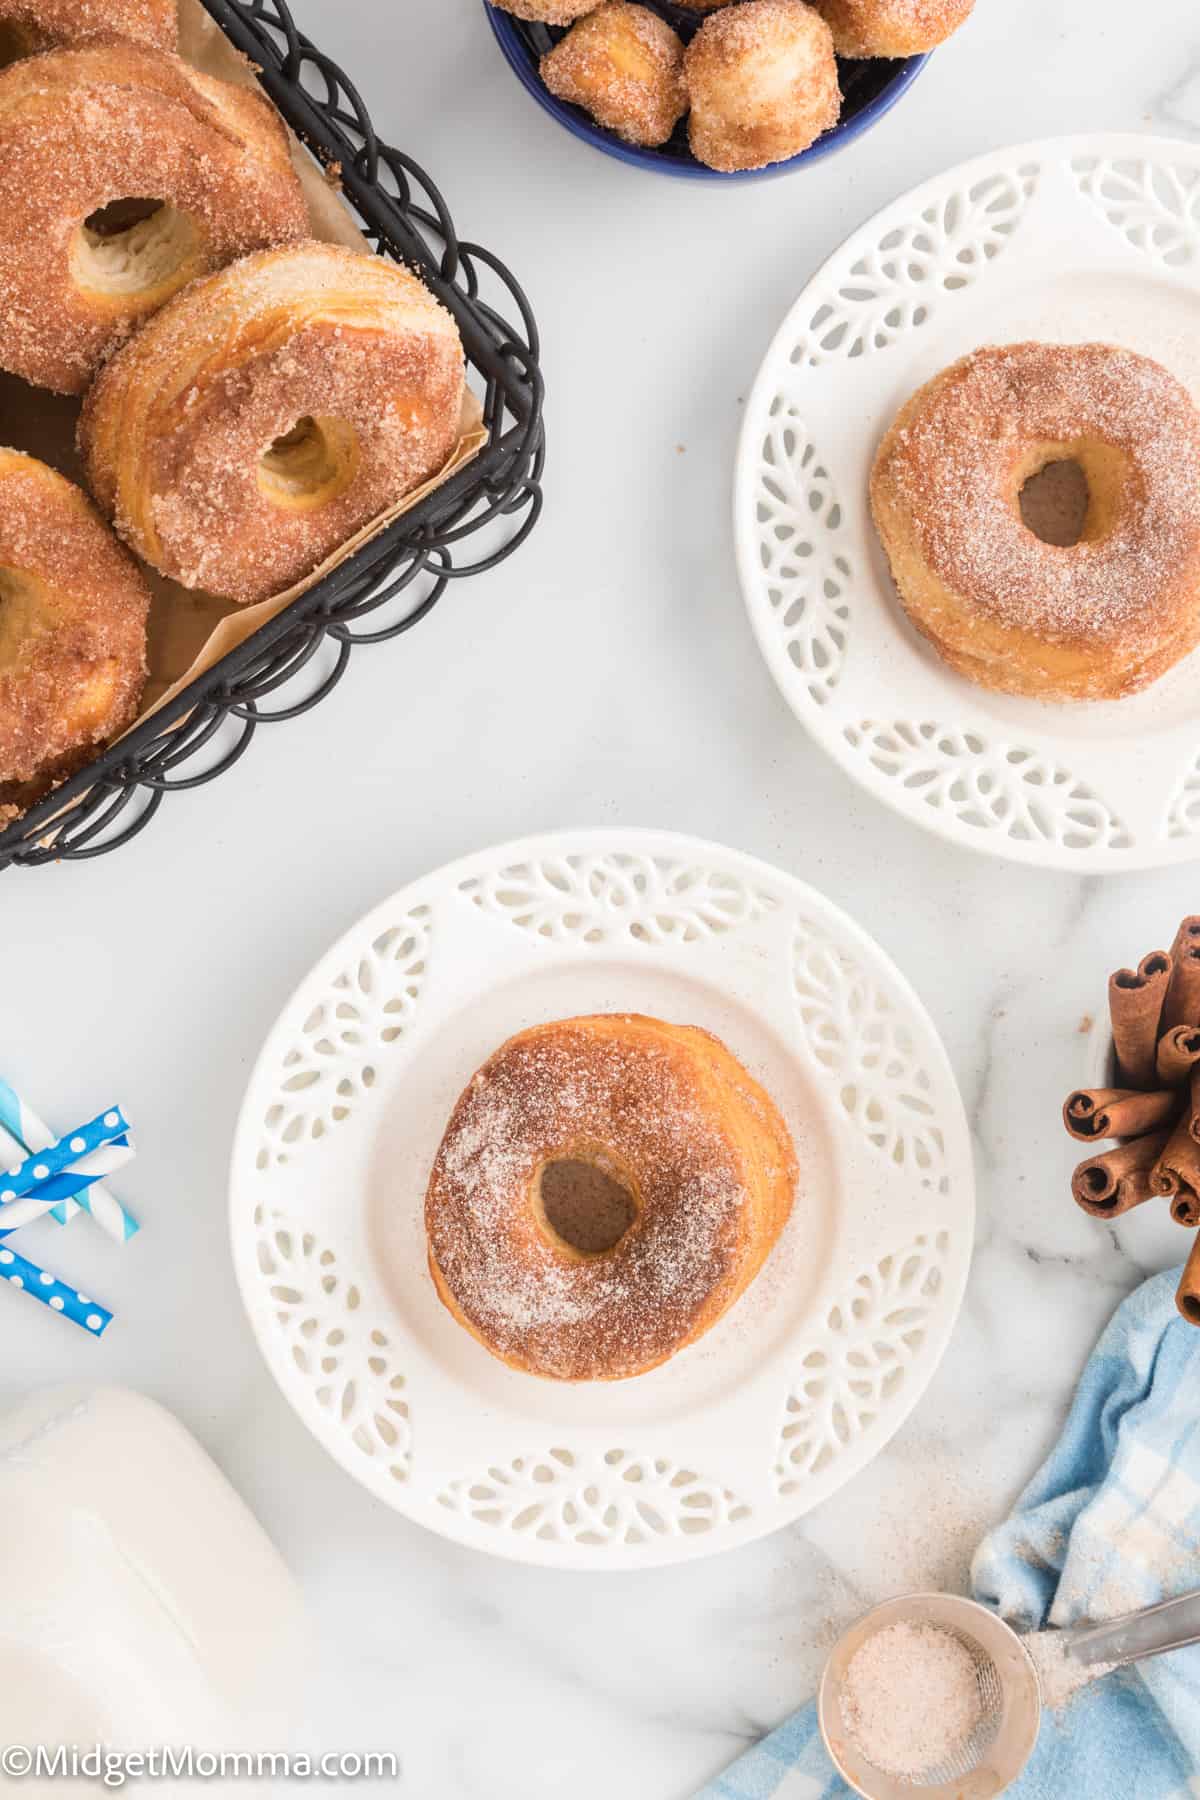 Cinnamon Sugar Air Fryer Donuts with Biscuits on a plate